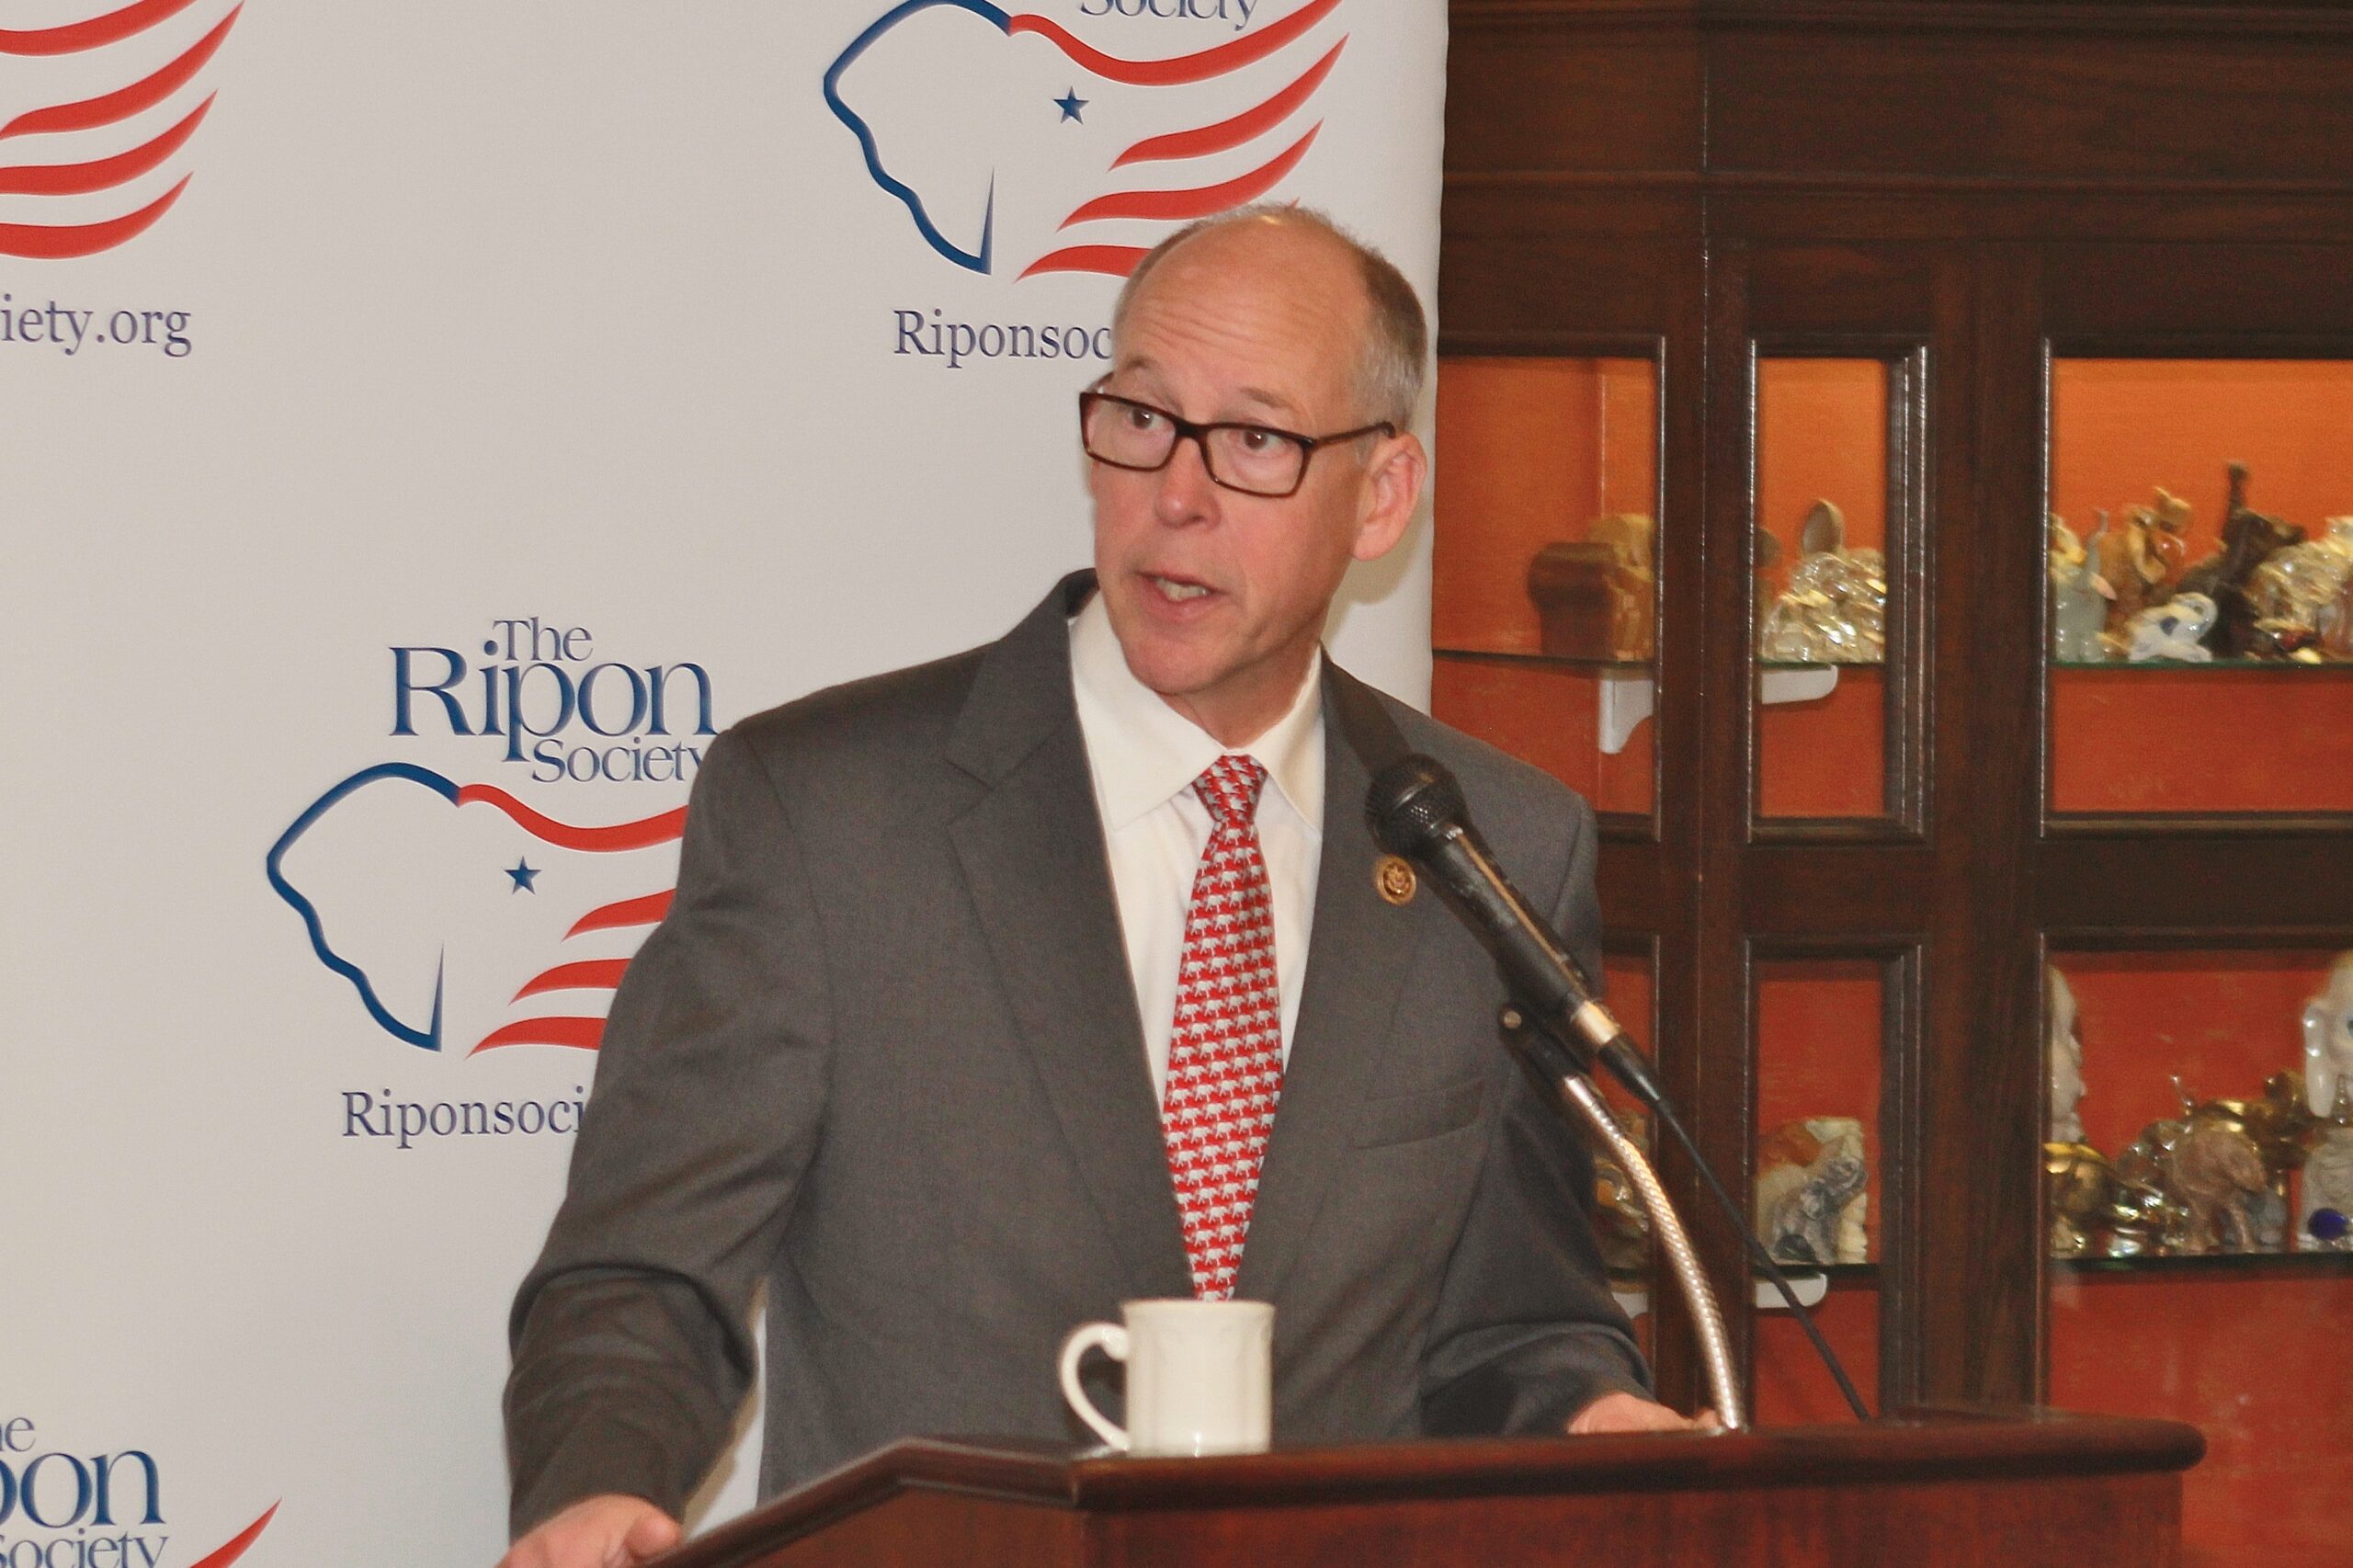 Ripon Society Holds Discussion with NRCC Chair Walden and Western Representatives